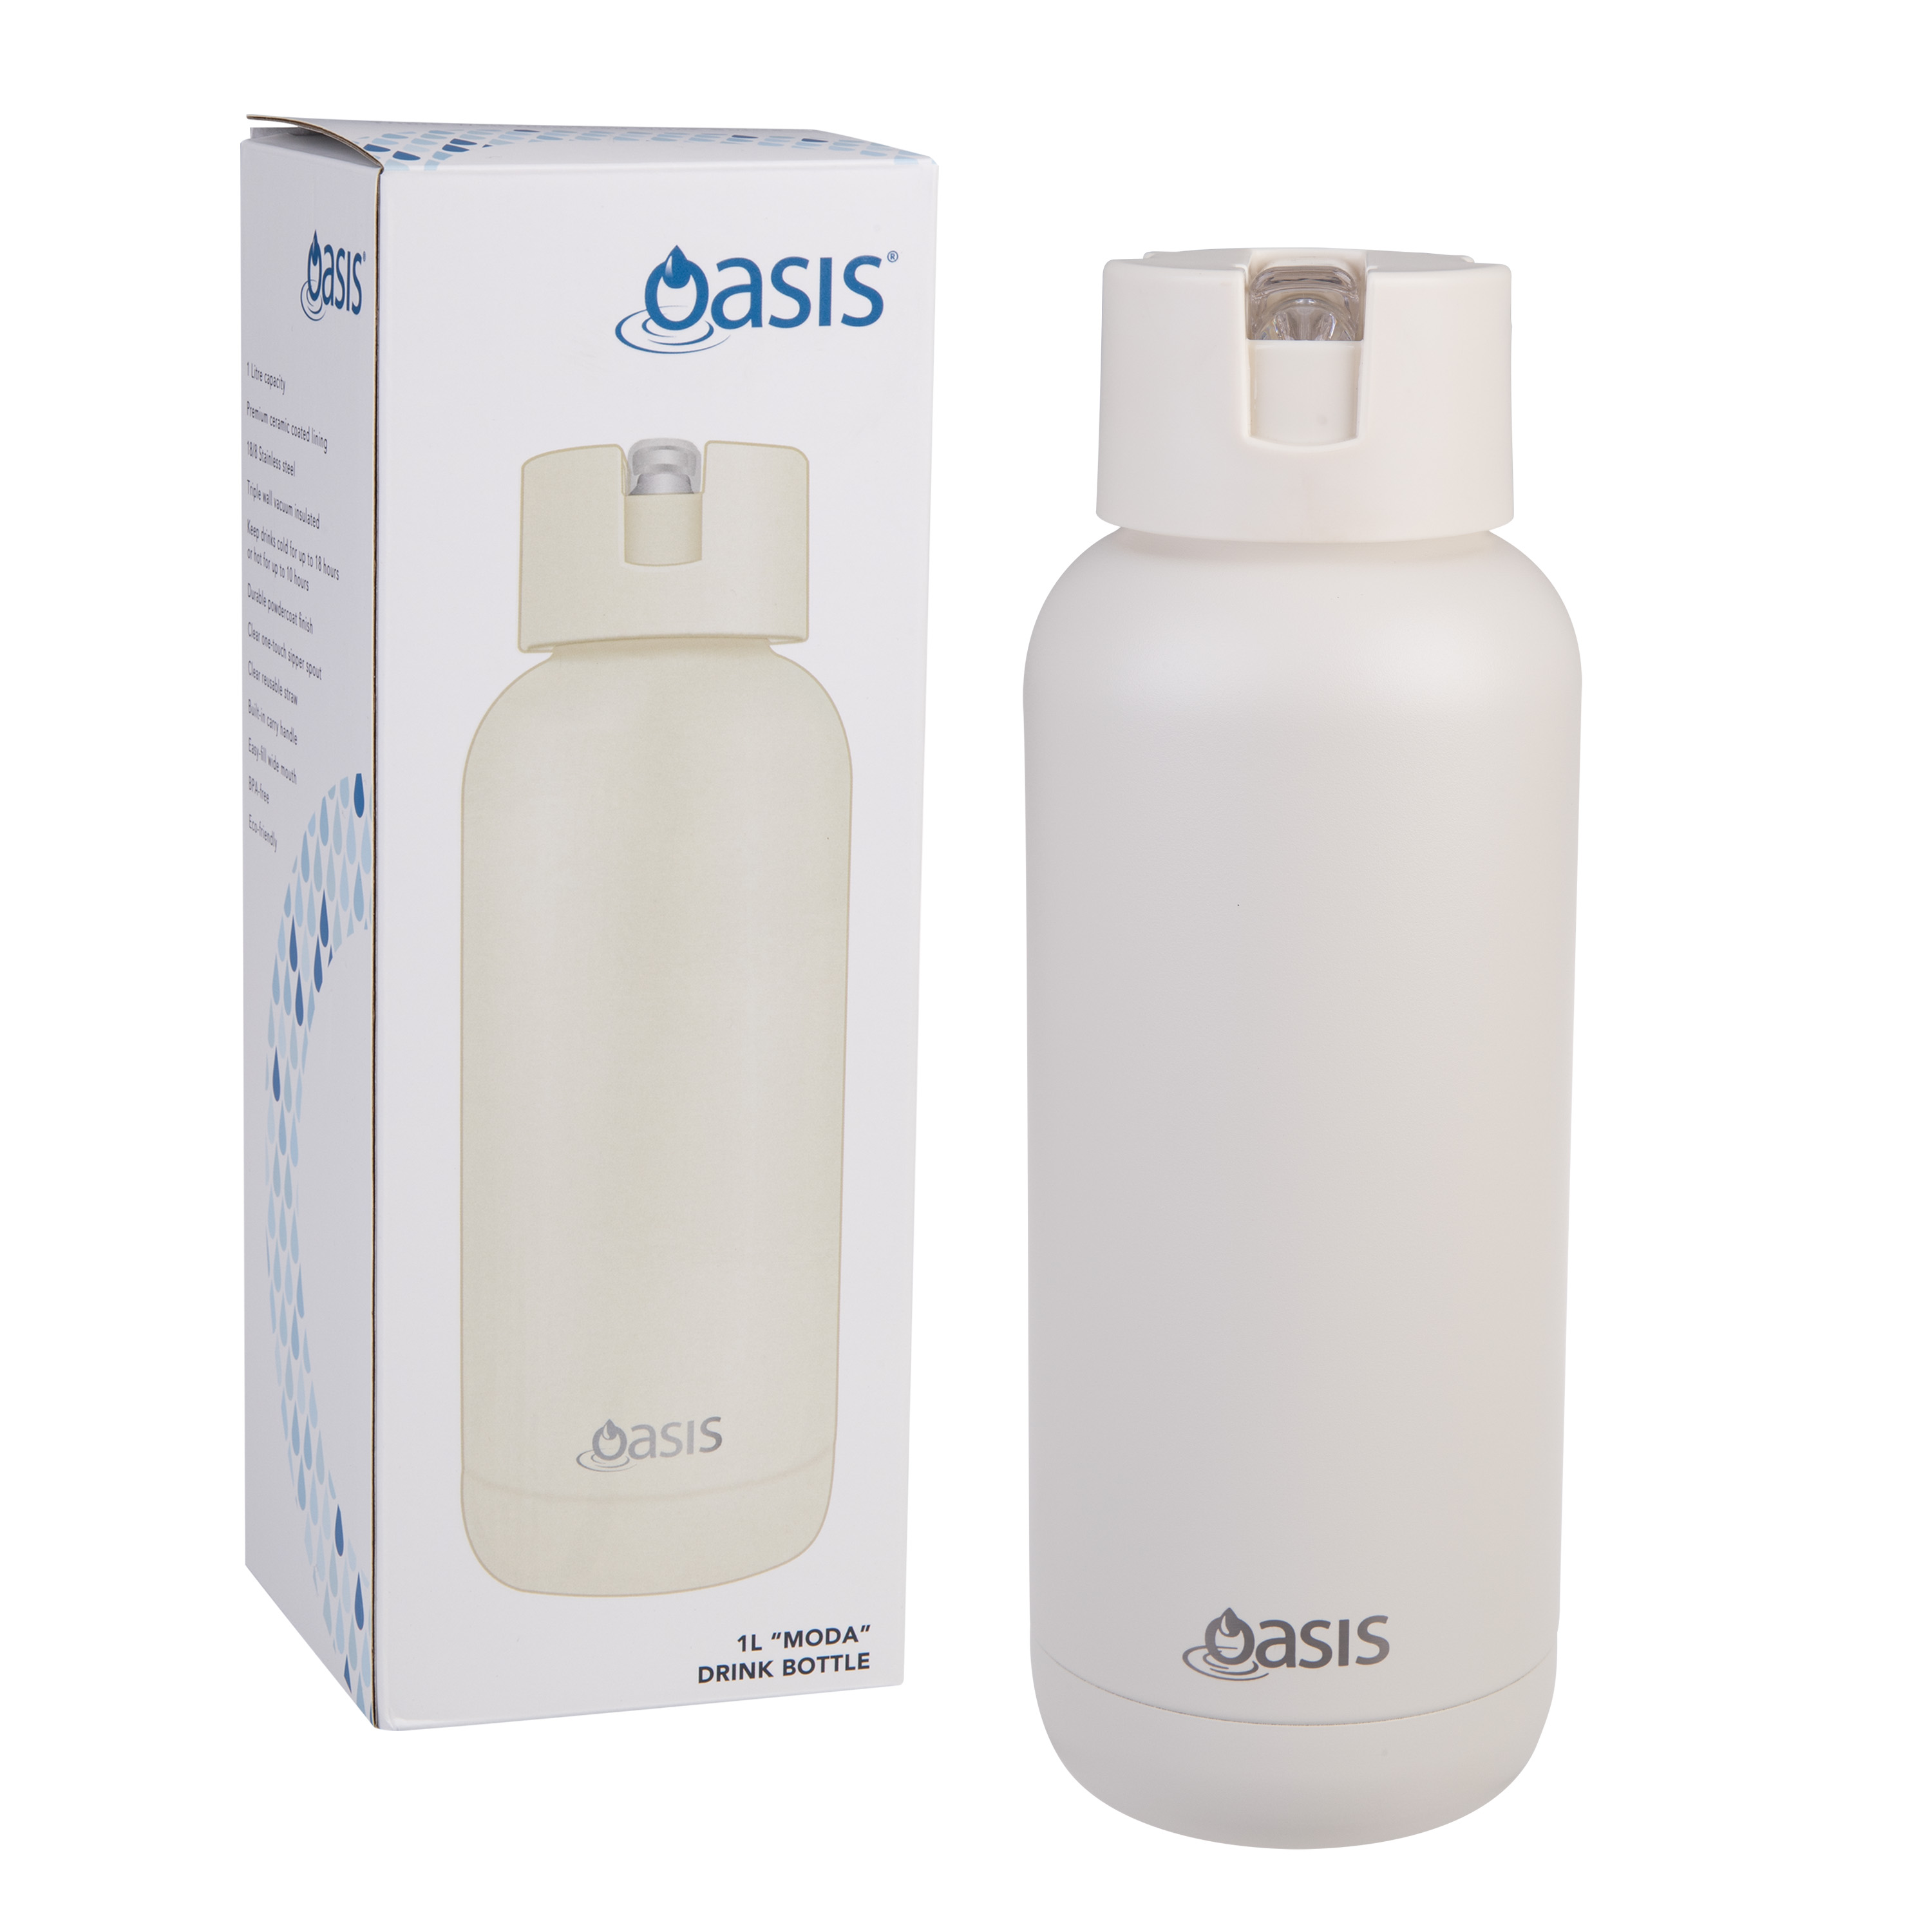 Oasis Stainless Steel Ceramic Moda Triple Wall Insulated Drink Bottle 1 Litre Alabaster